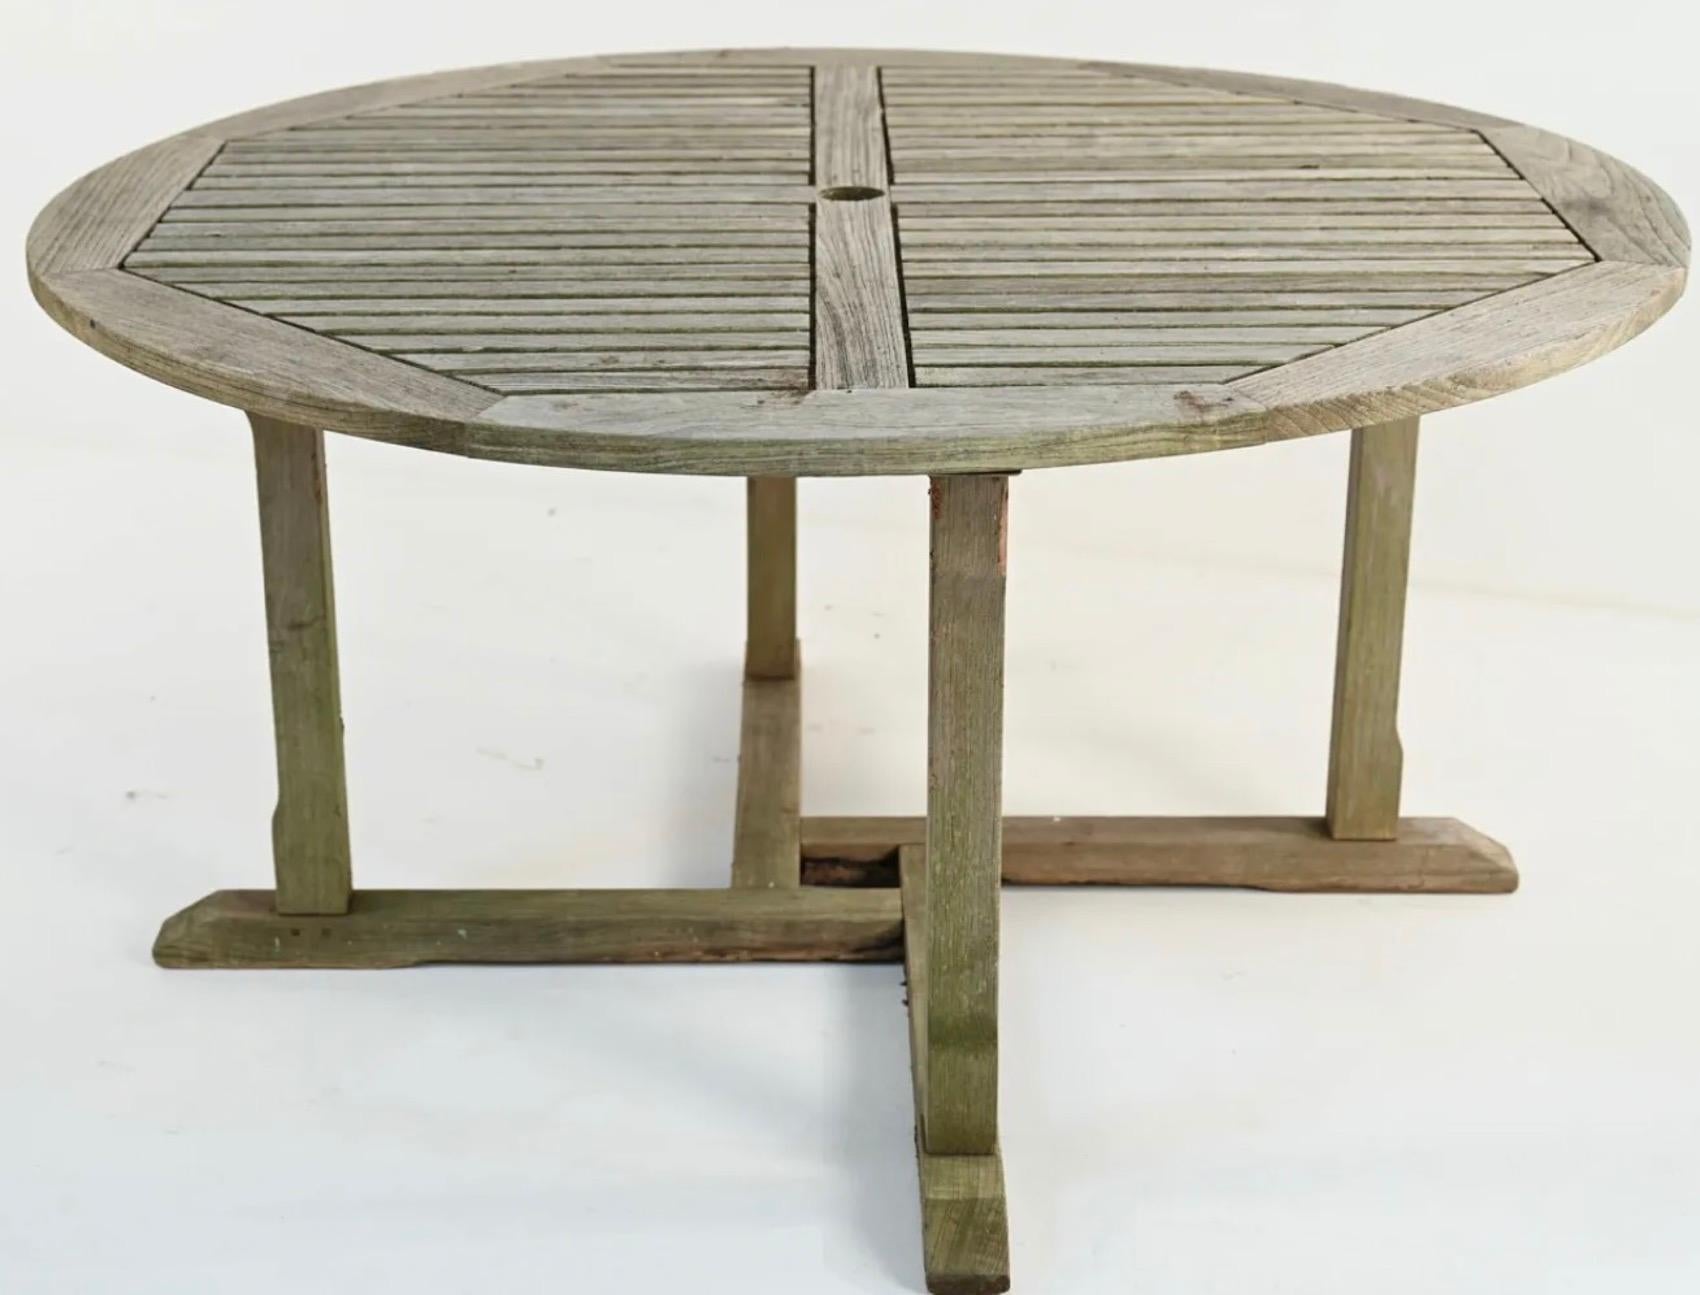 Vintage Round Teak Wood Outdoor Garden Dining Table In Good Condition For Sale In Sheffield, MA